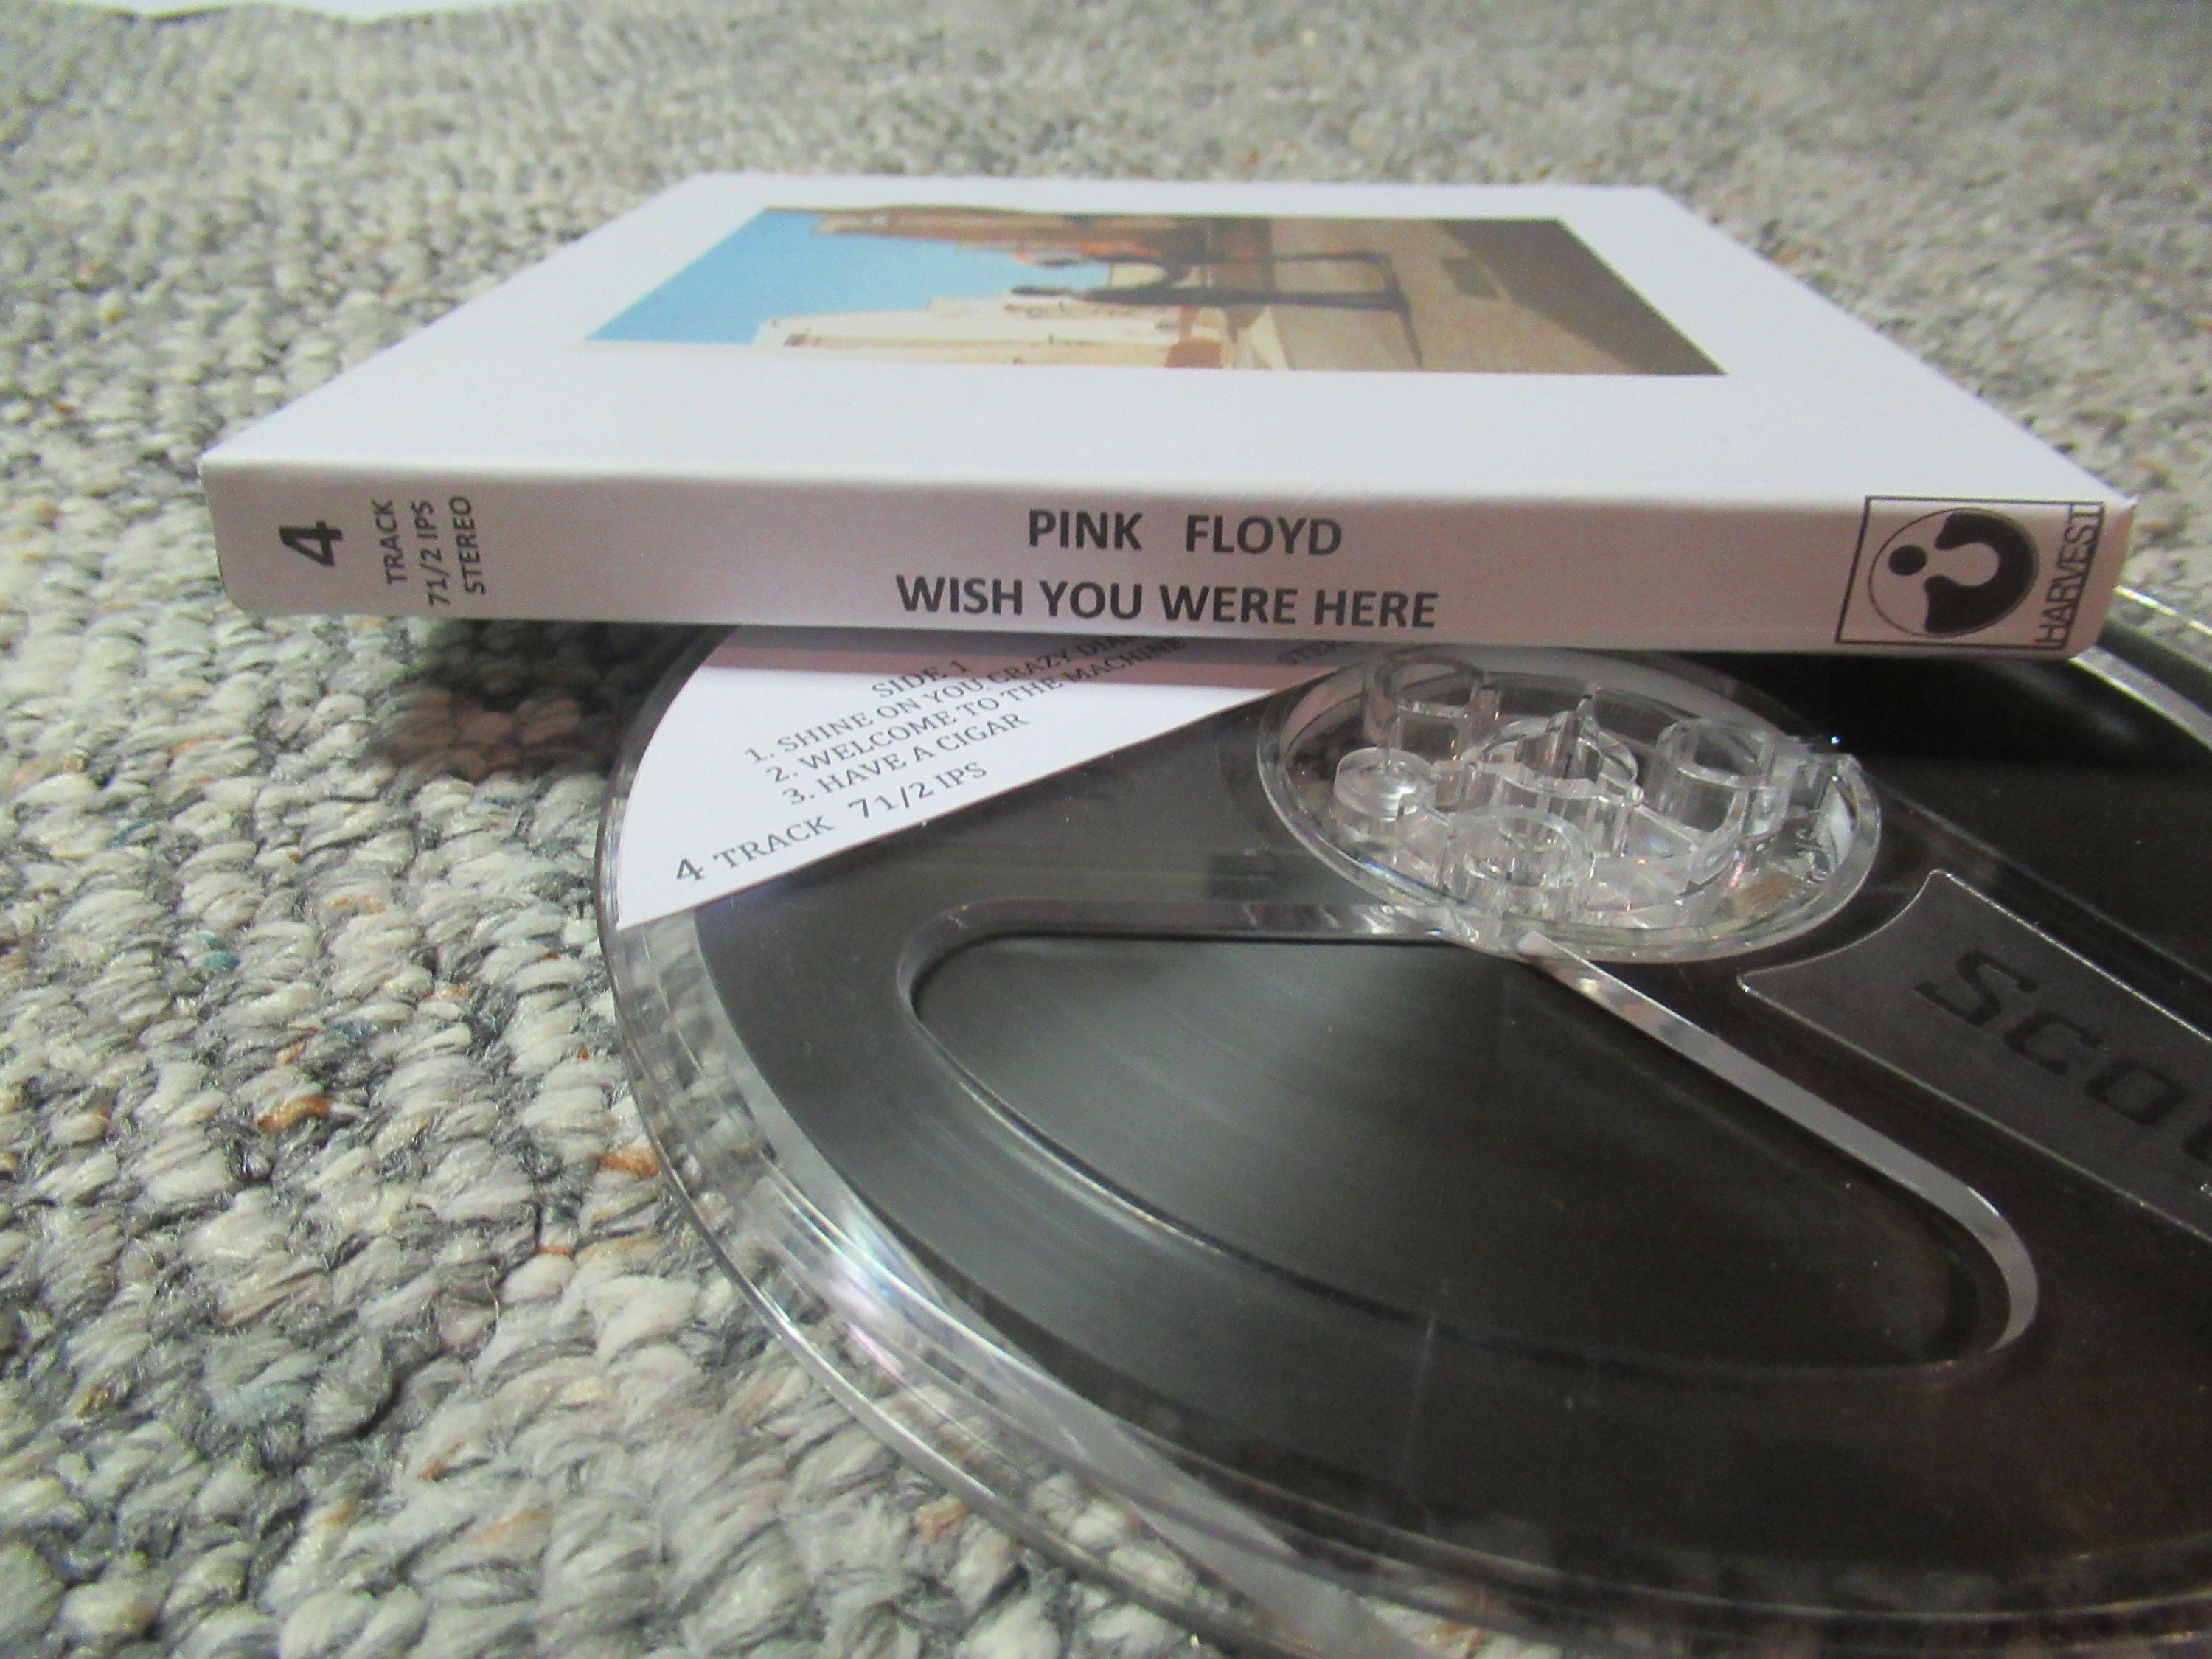 Pink Floyd Wish You Were Here 71/2 IPS 4track Reel to Reel Tape 